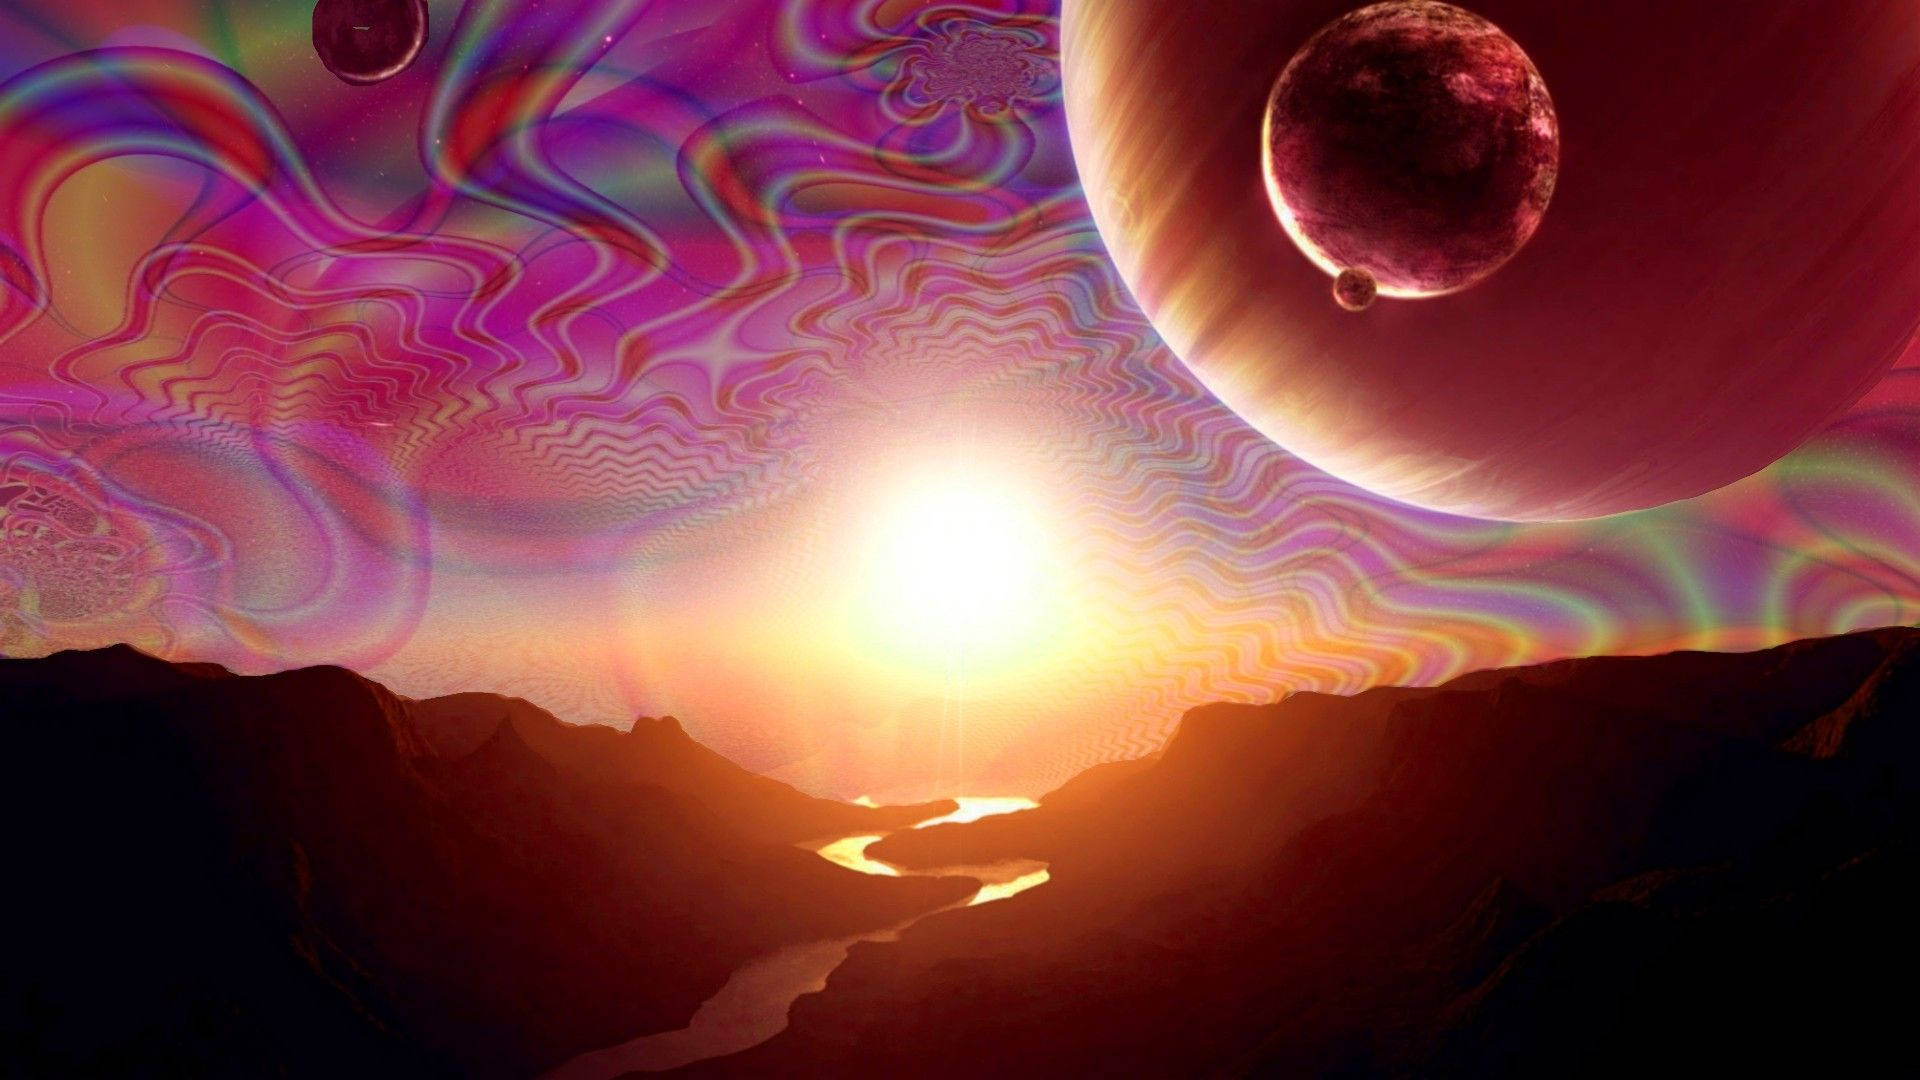 A psychedelic wallpaper of sky with celestial bodies and bright sunset.